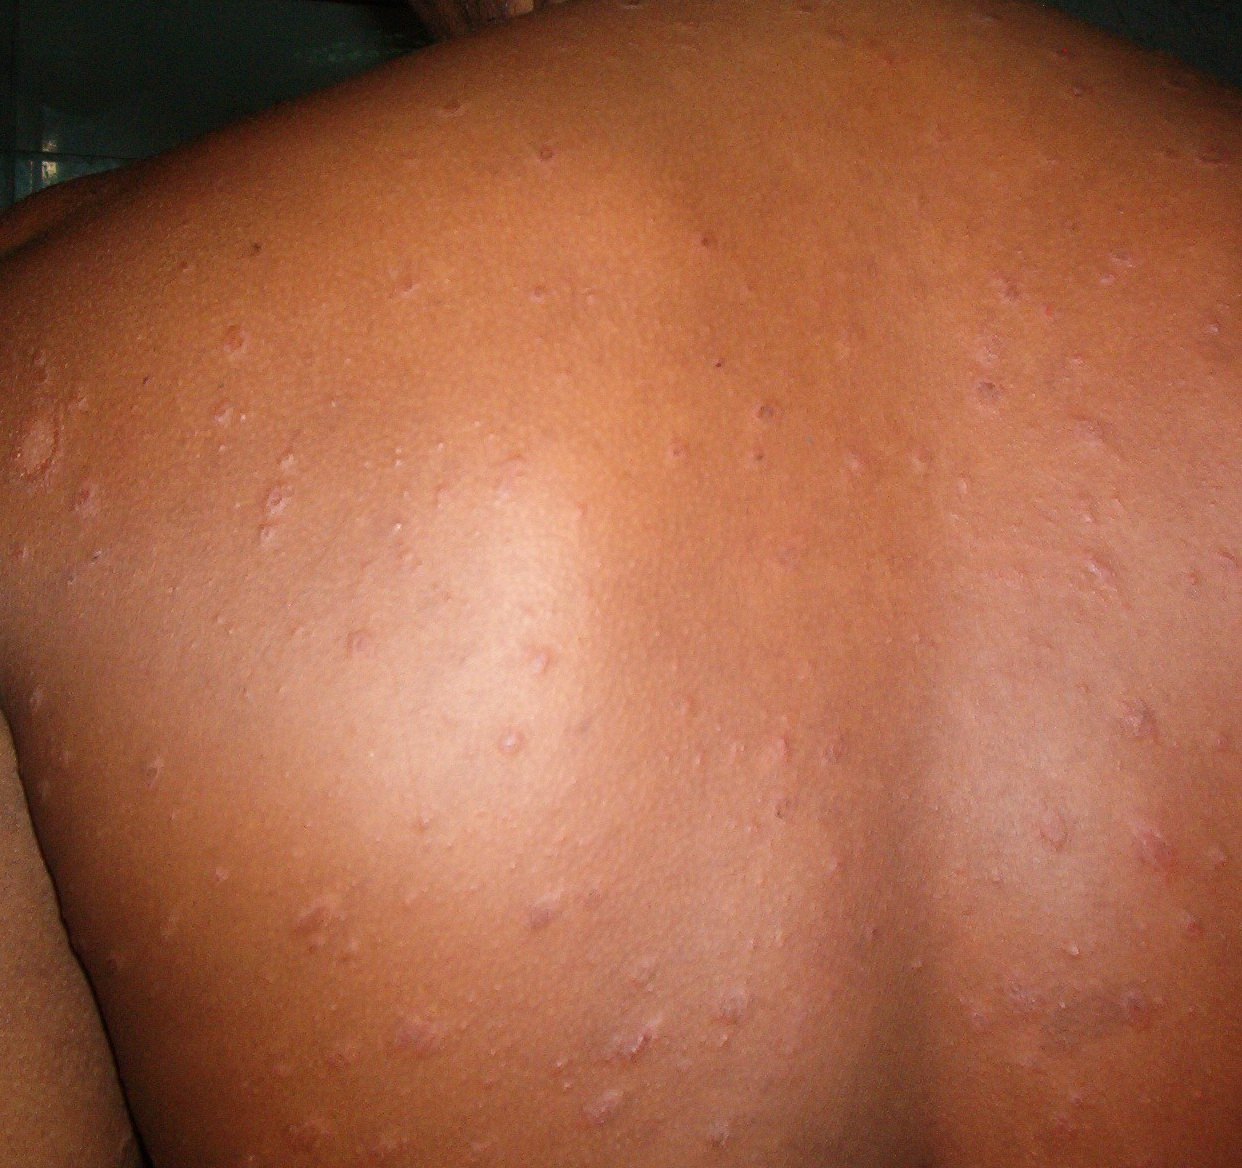 Pityriasis Rosea Picture Image on MedicineNet.com